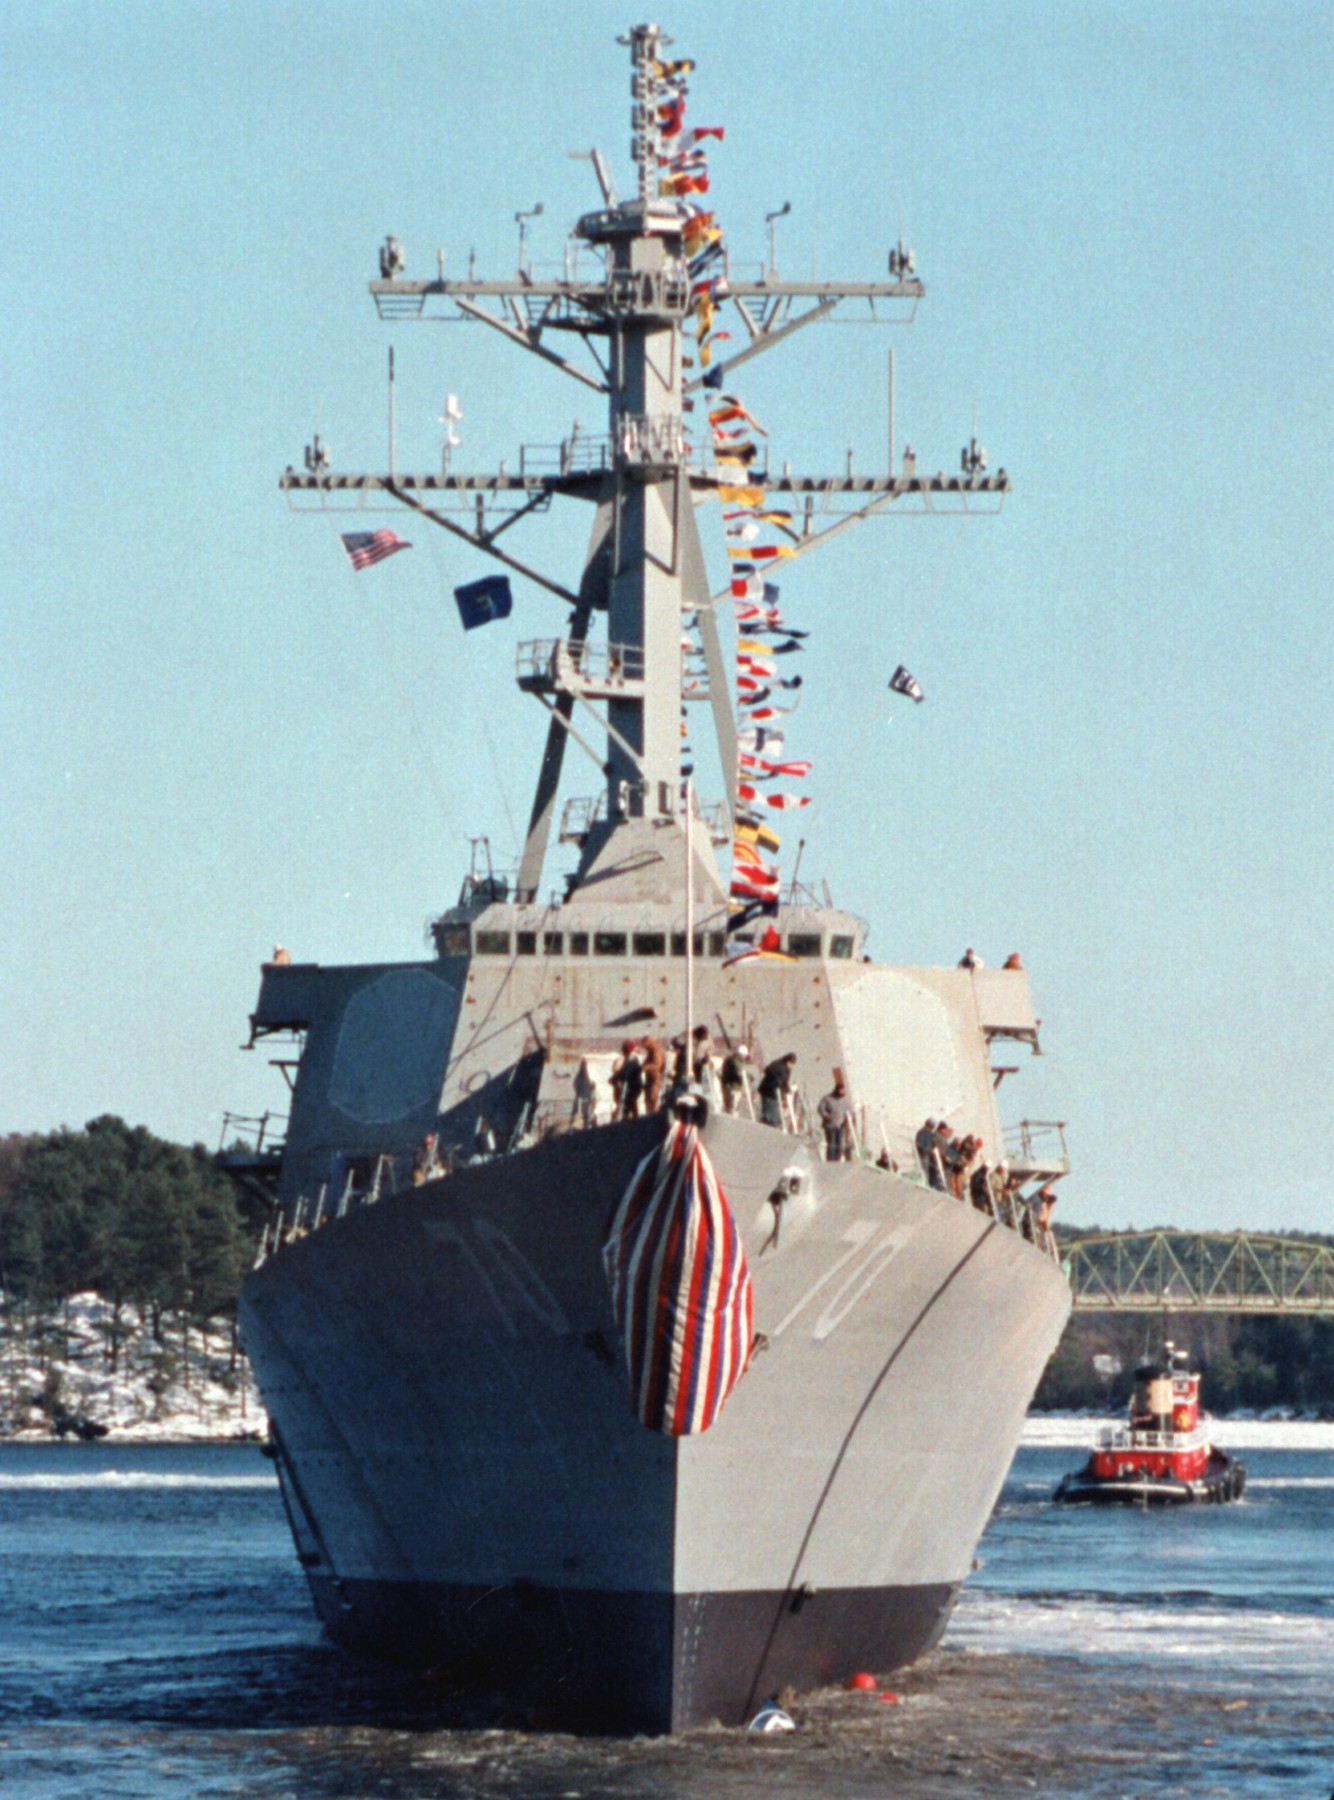 ddg-70 uss hopper guided missile destroyer arleigh burke class aegis bmd 69 launching ceremony bath iron works maine